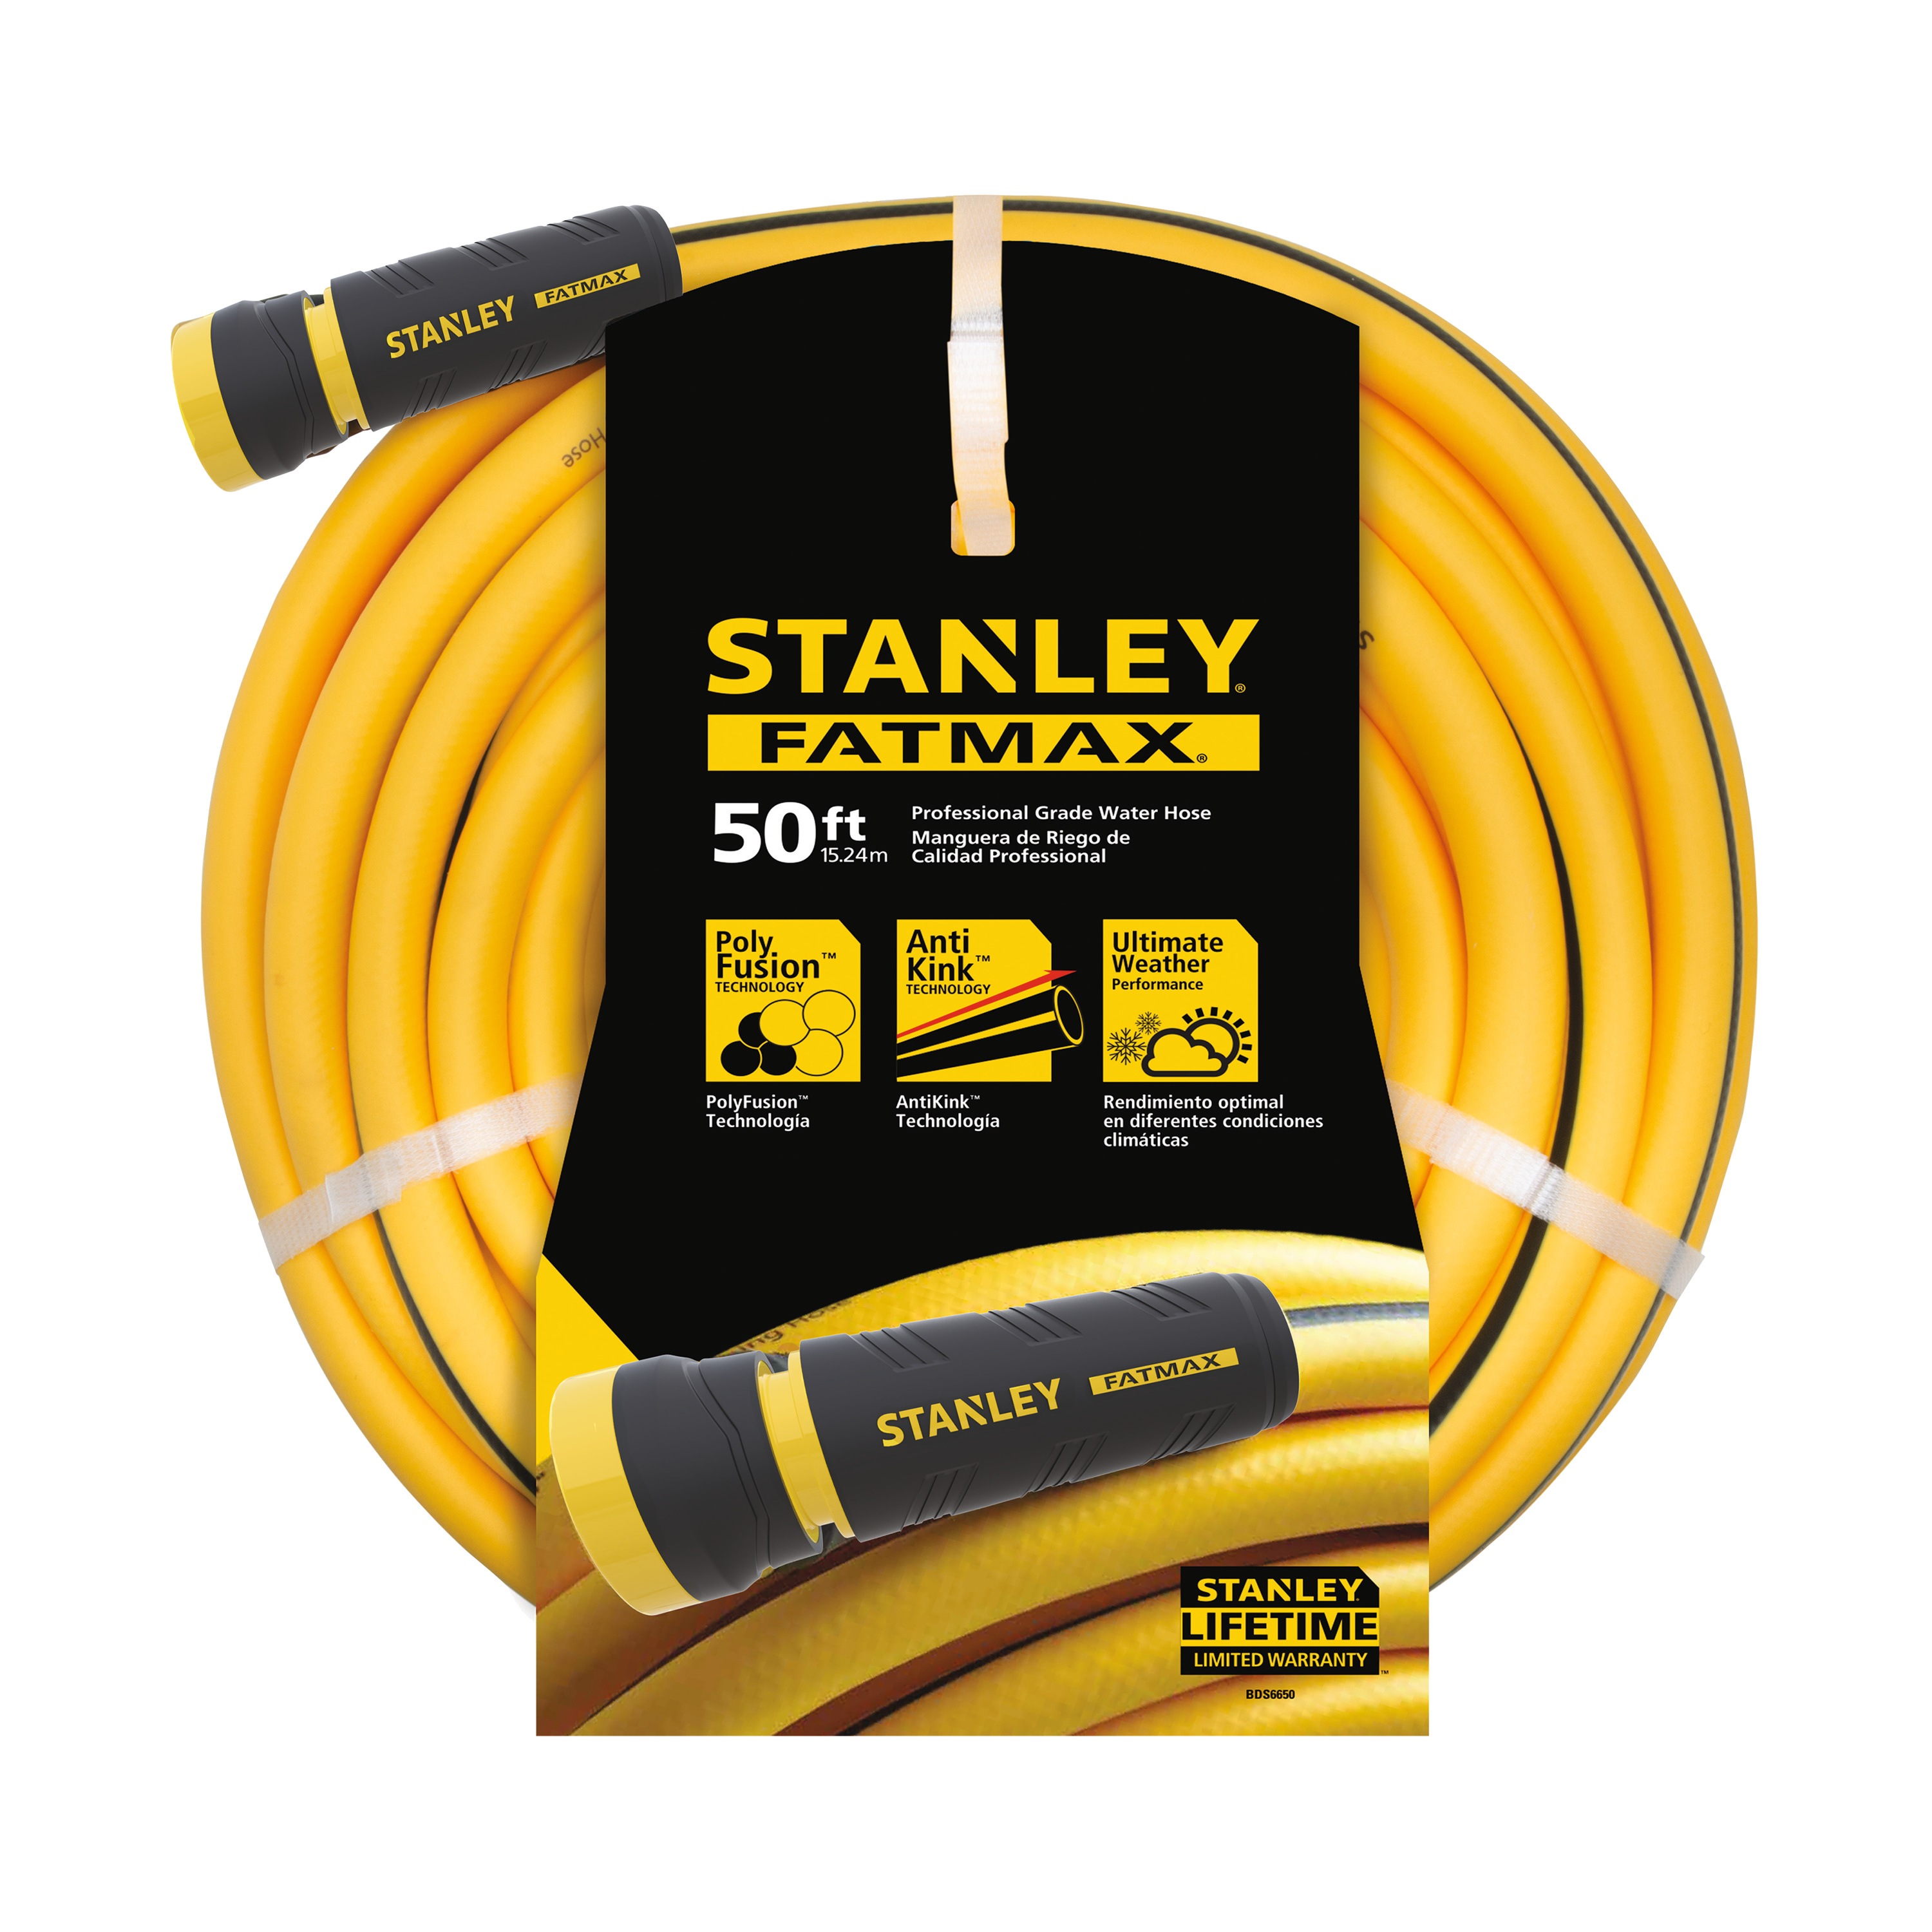 Stanley Tools - FATMAX 50 ft Professional Grade Water Hose - BDS6650